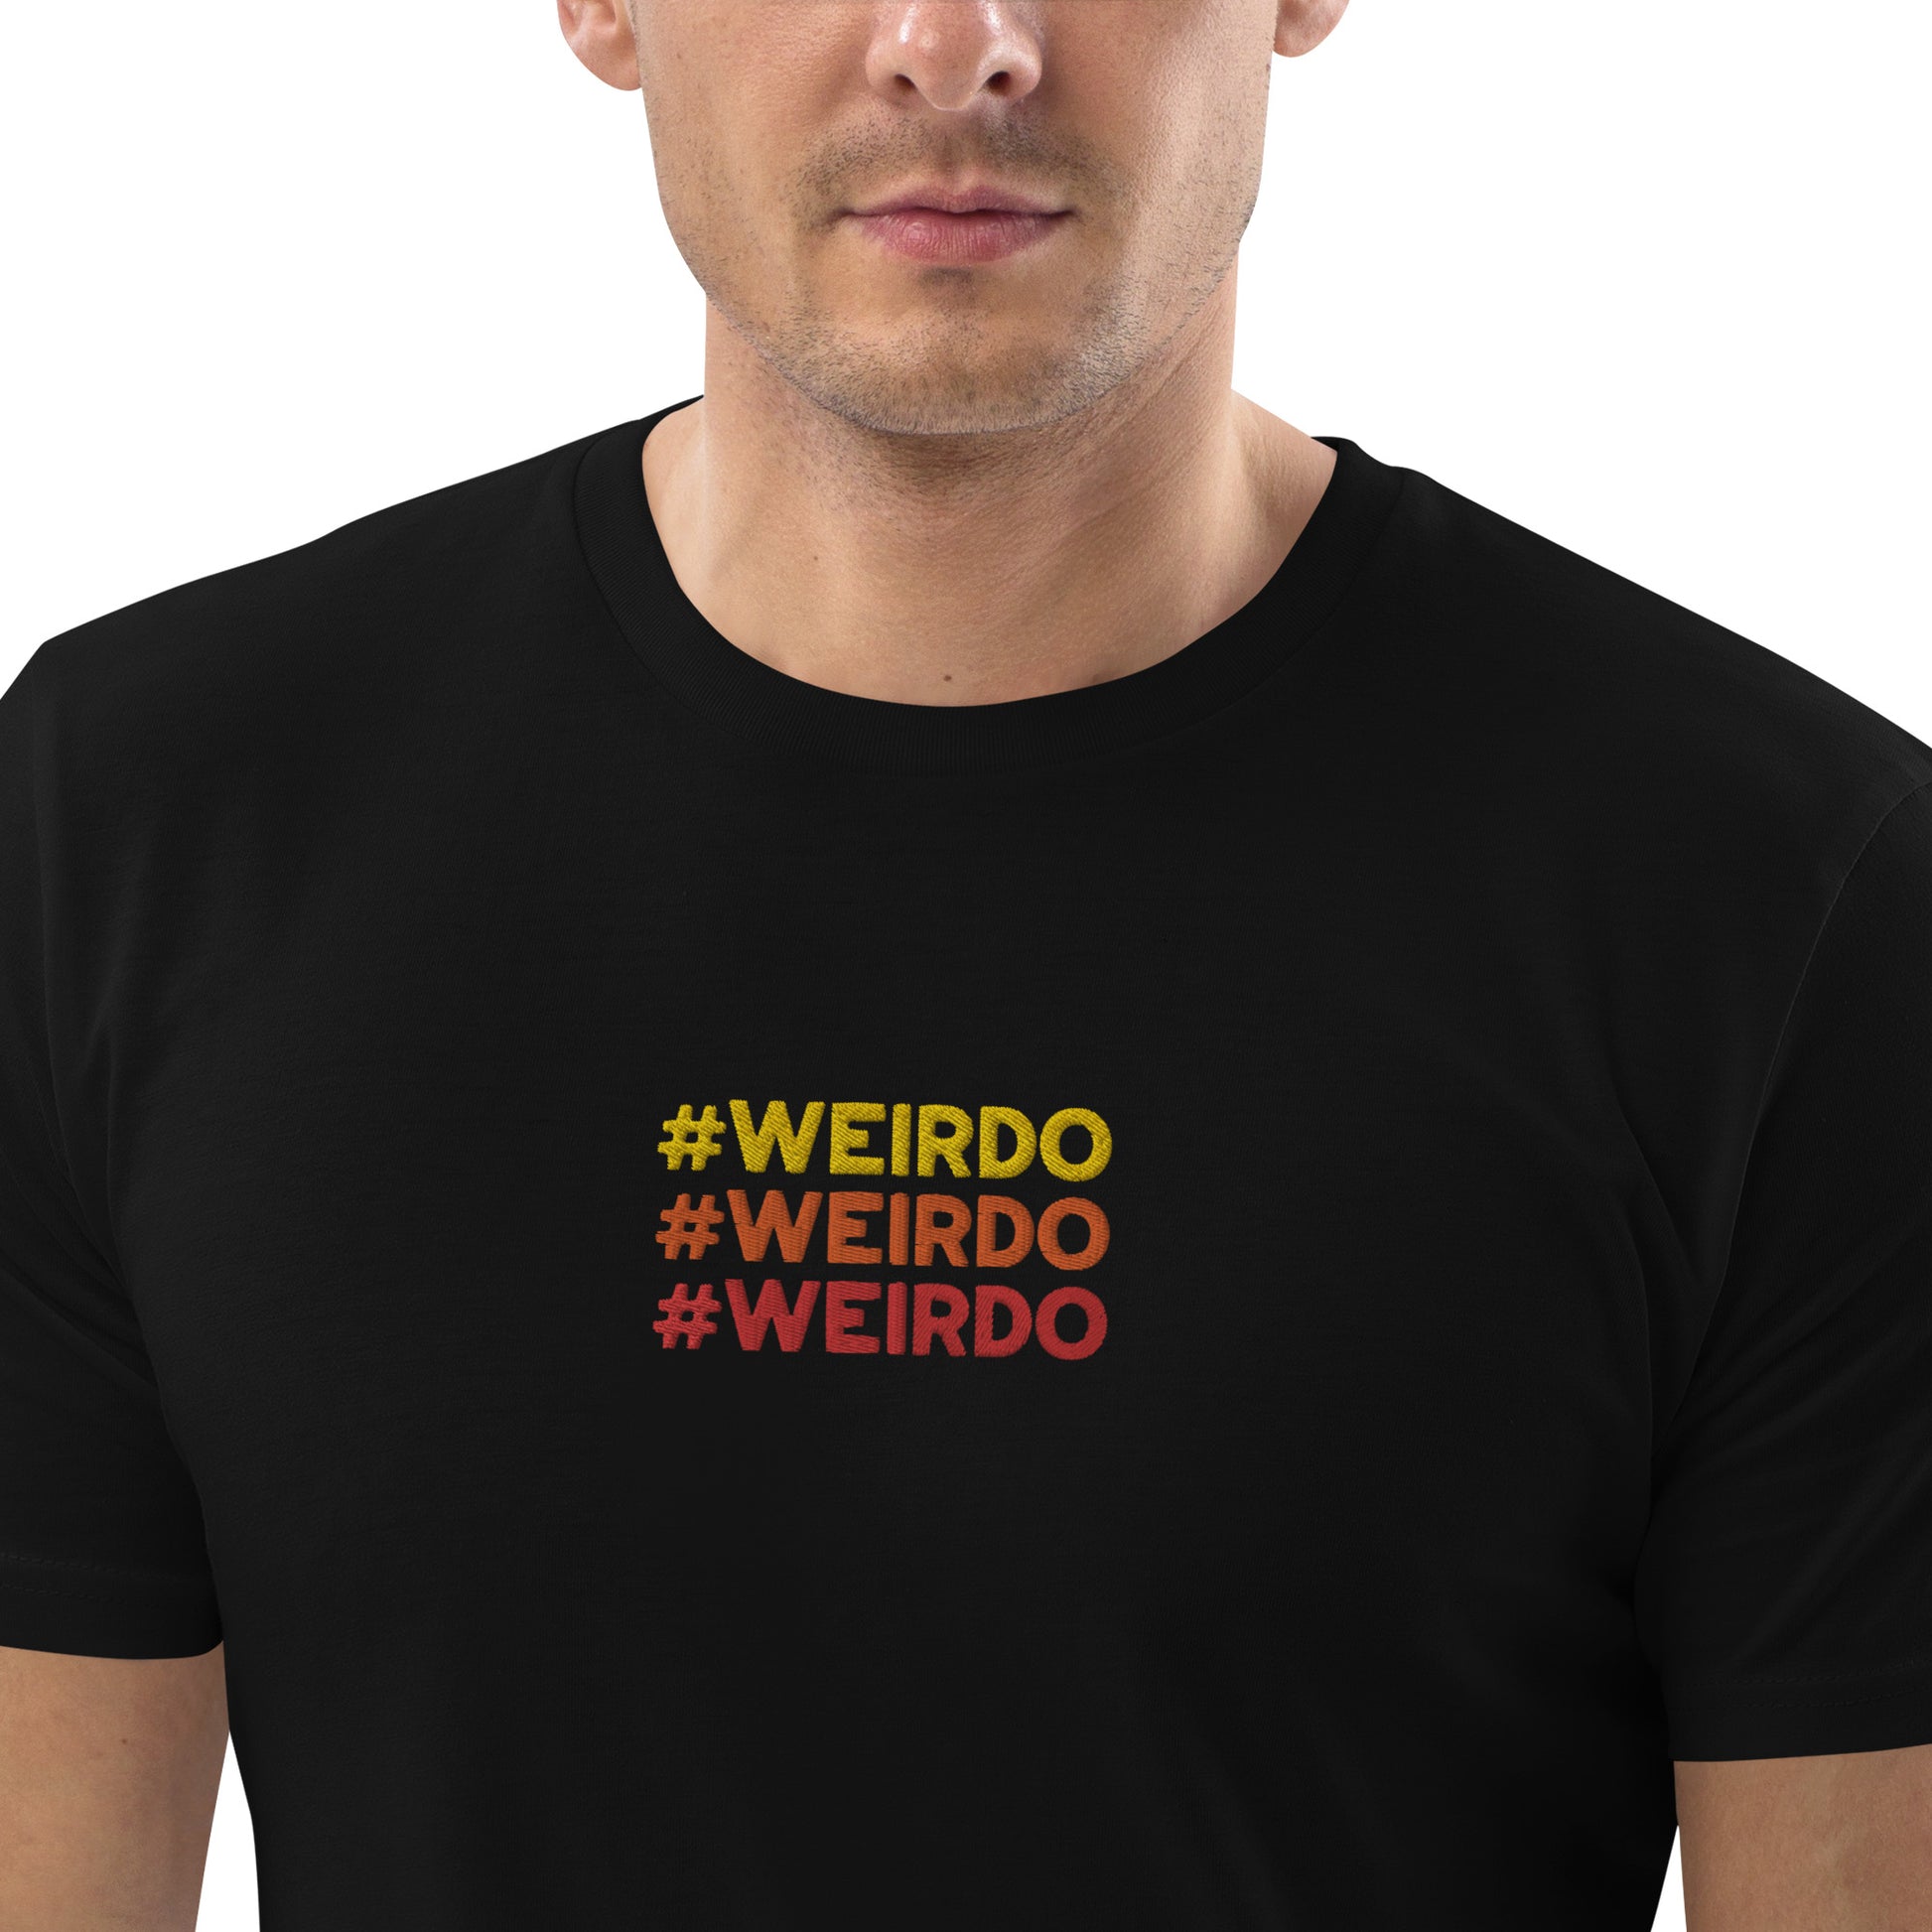 #WEIRDO meme is embroidered 3 times at the front of this cotton t shirt for men. The weirdo meme is embroidered in the colors, yellow, orange and red. Weird gifts are available in our online web shop for weirdos.